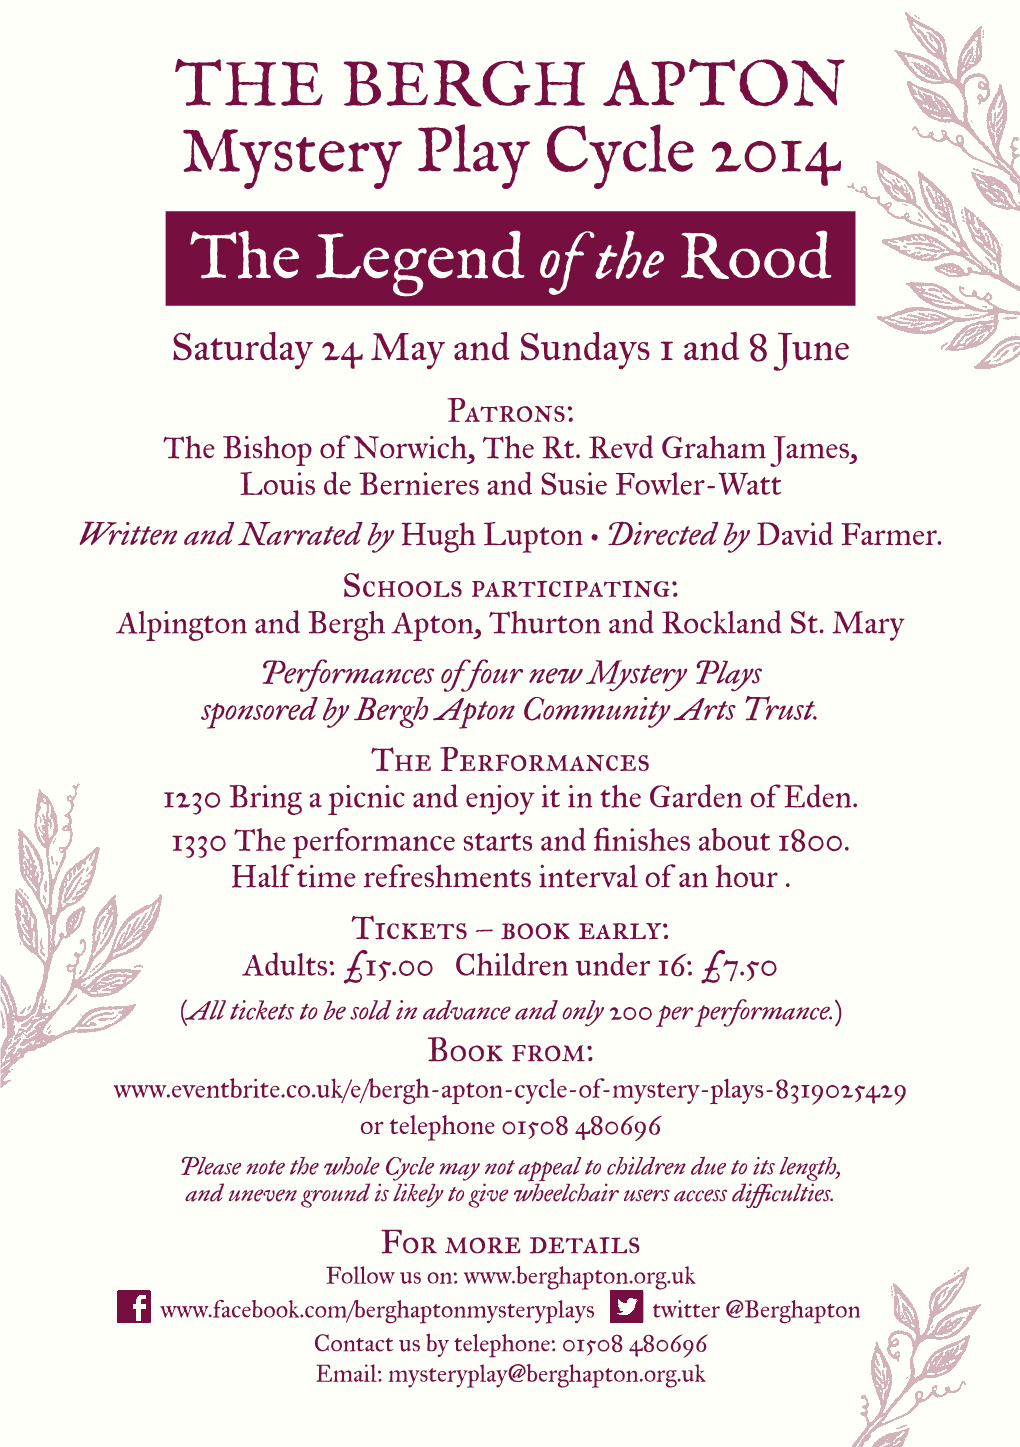 THE BERGH APTON Mystery Play Cycle 2014 the Legend of the Rood Saturday 24 May and Sundays 1 and 8 June Patrons: the Bishop of Norwich, the Rt